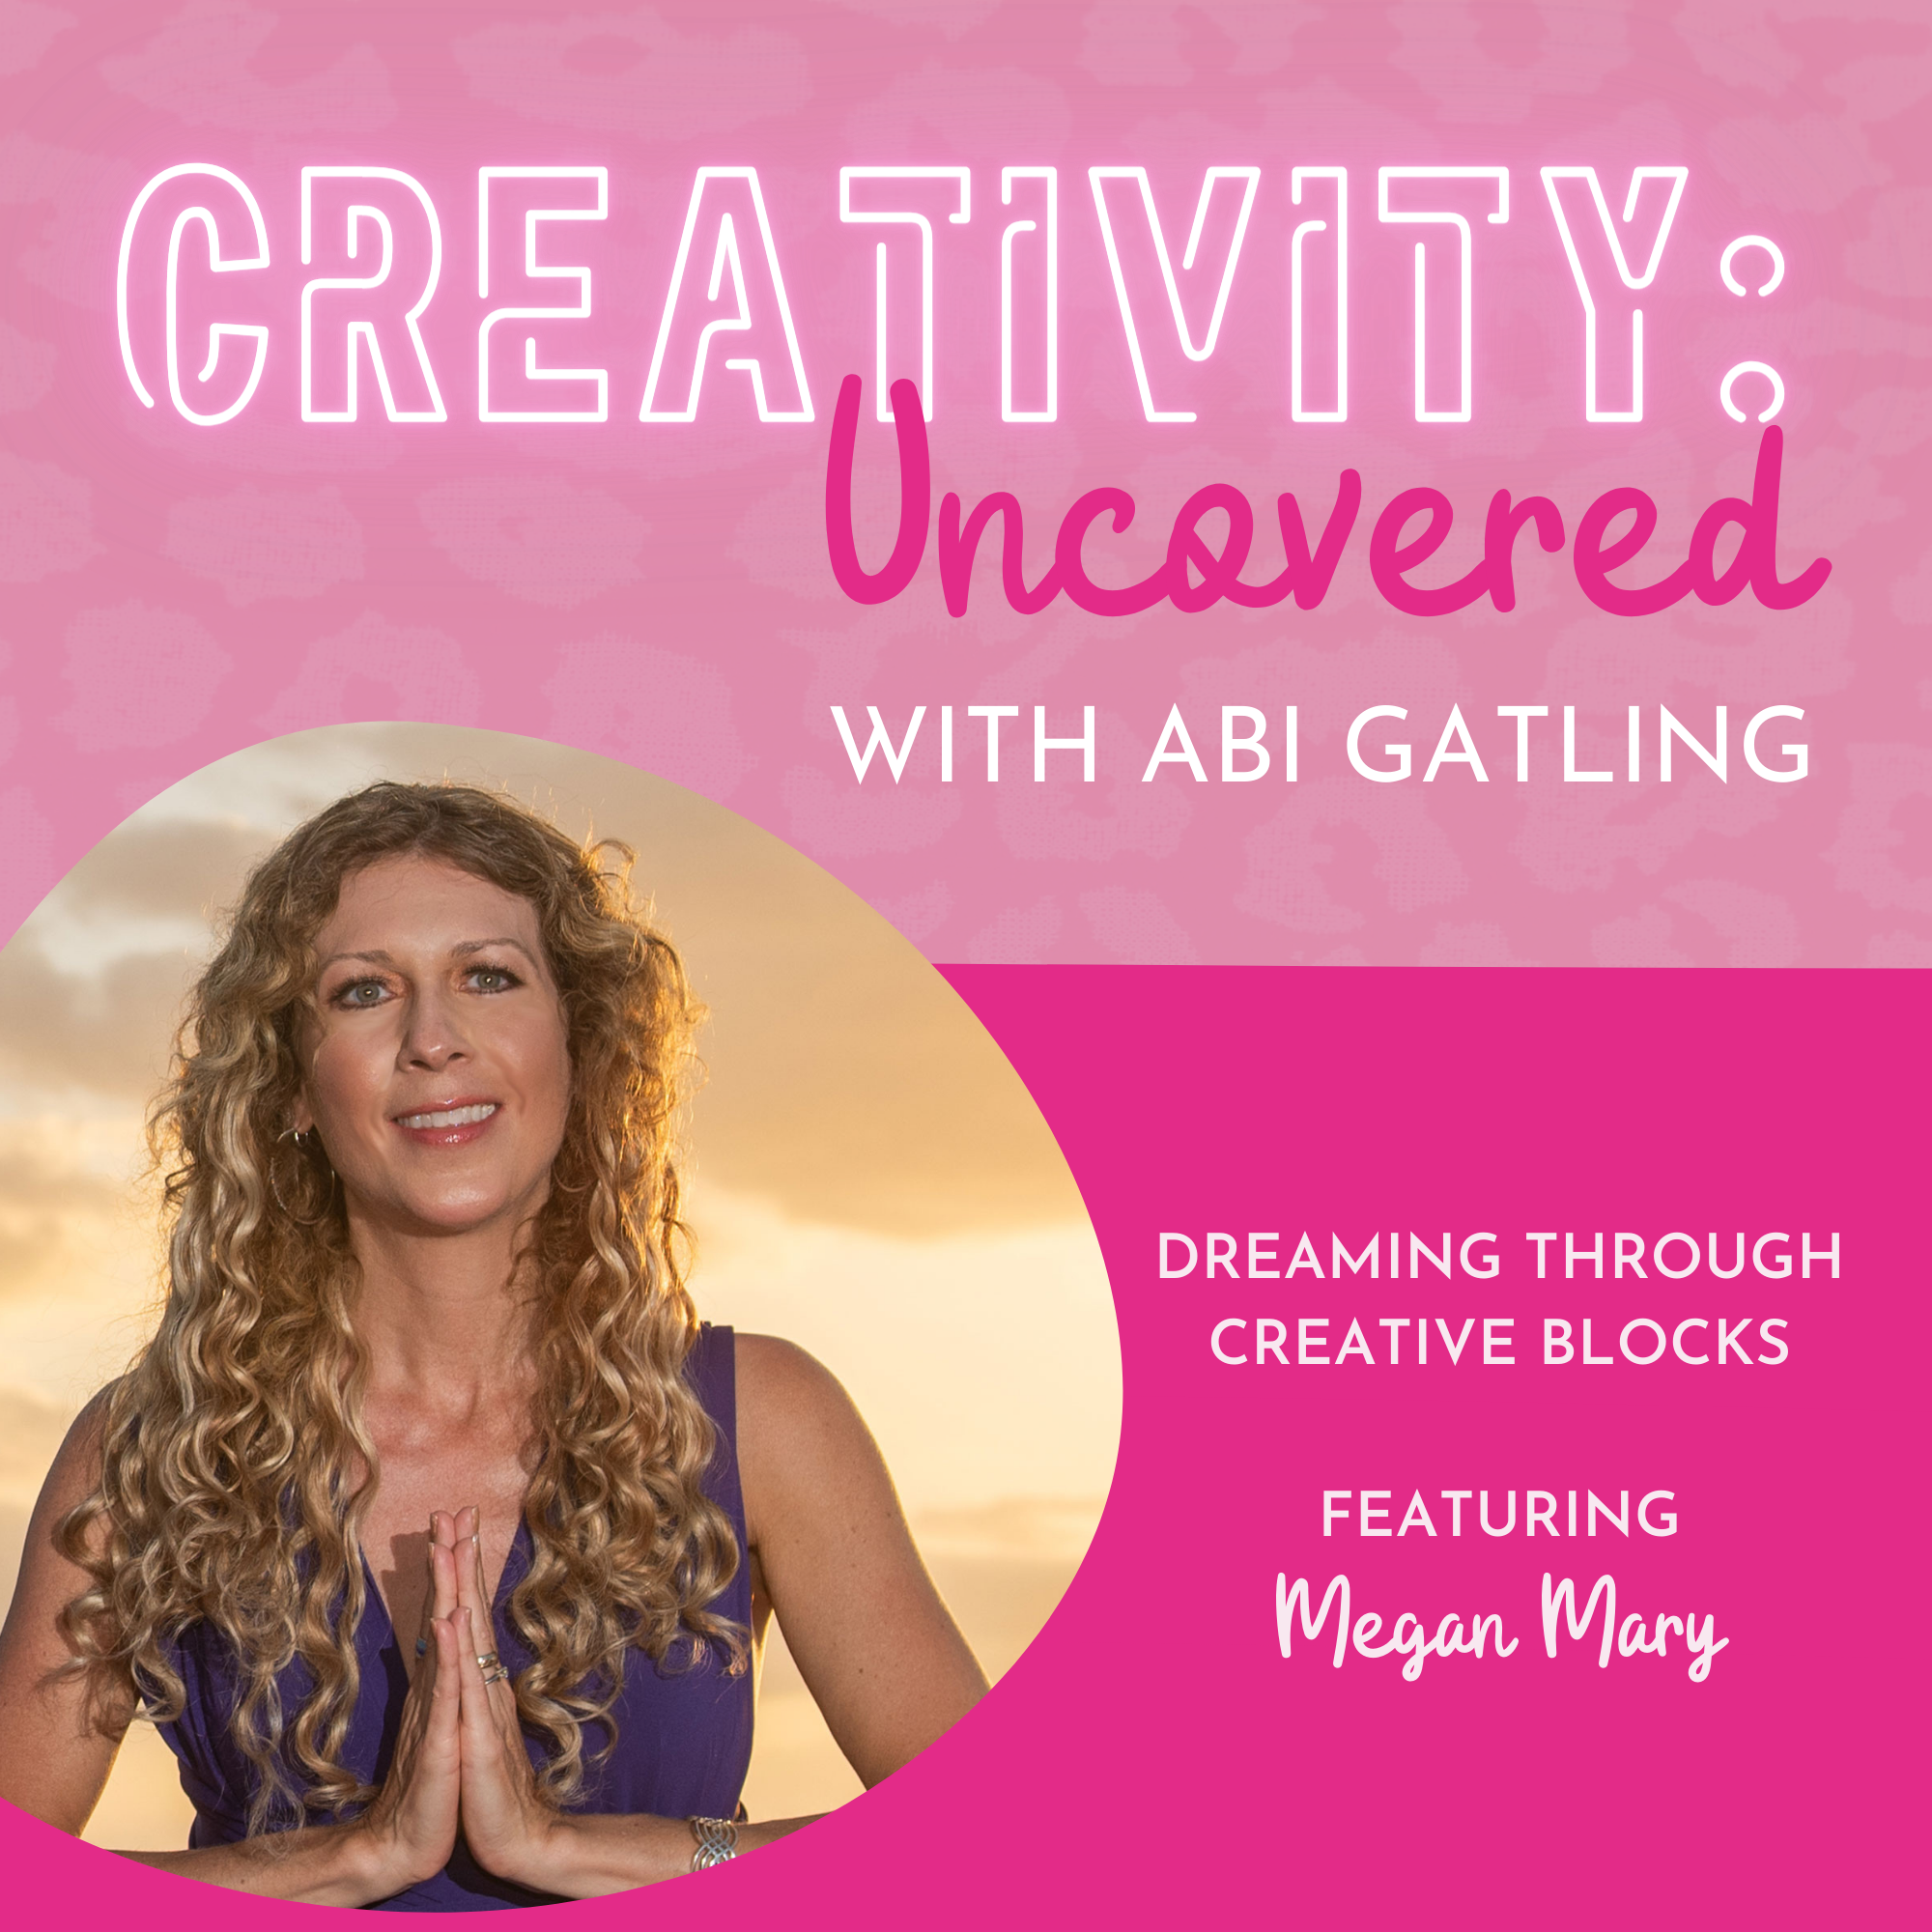 Creativity: Uncovered podcast episode graphic featuring guest Megan Mary